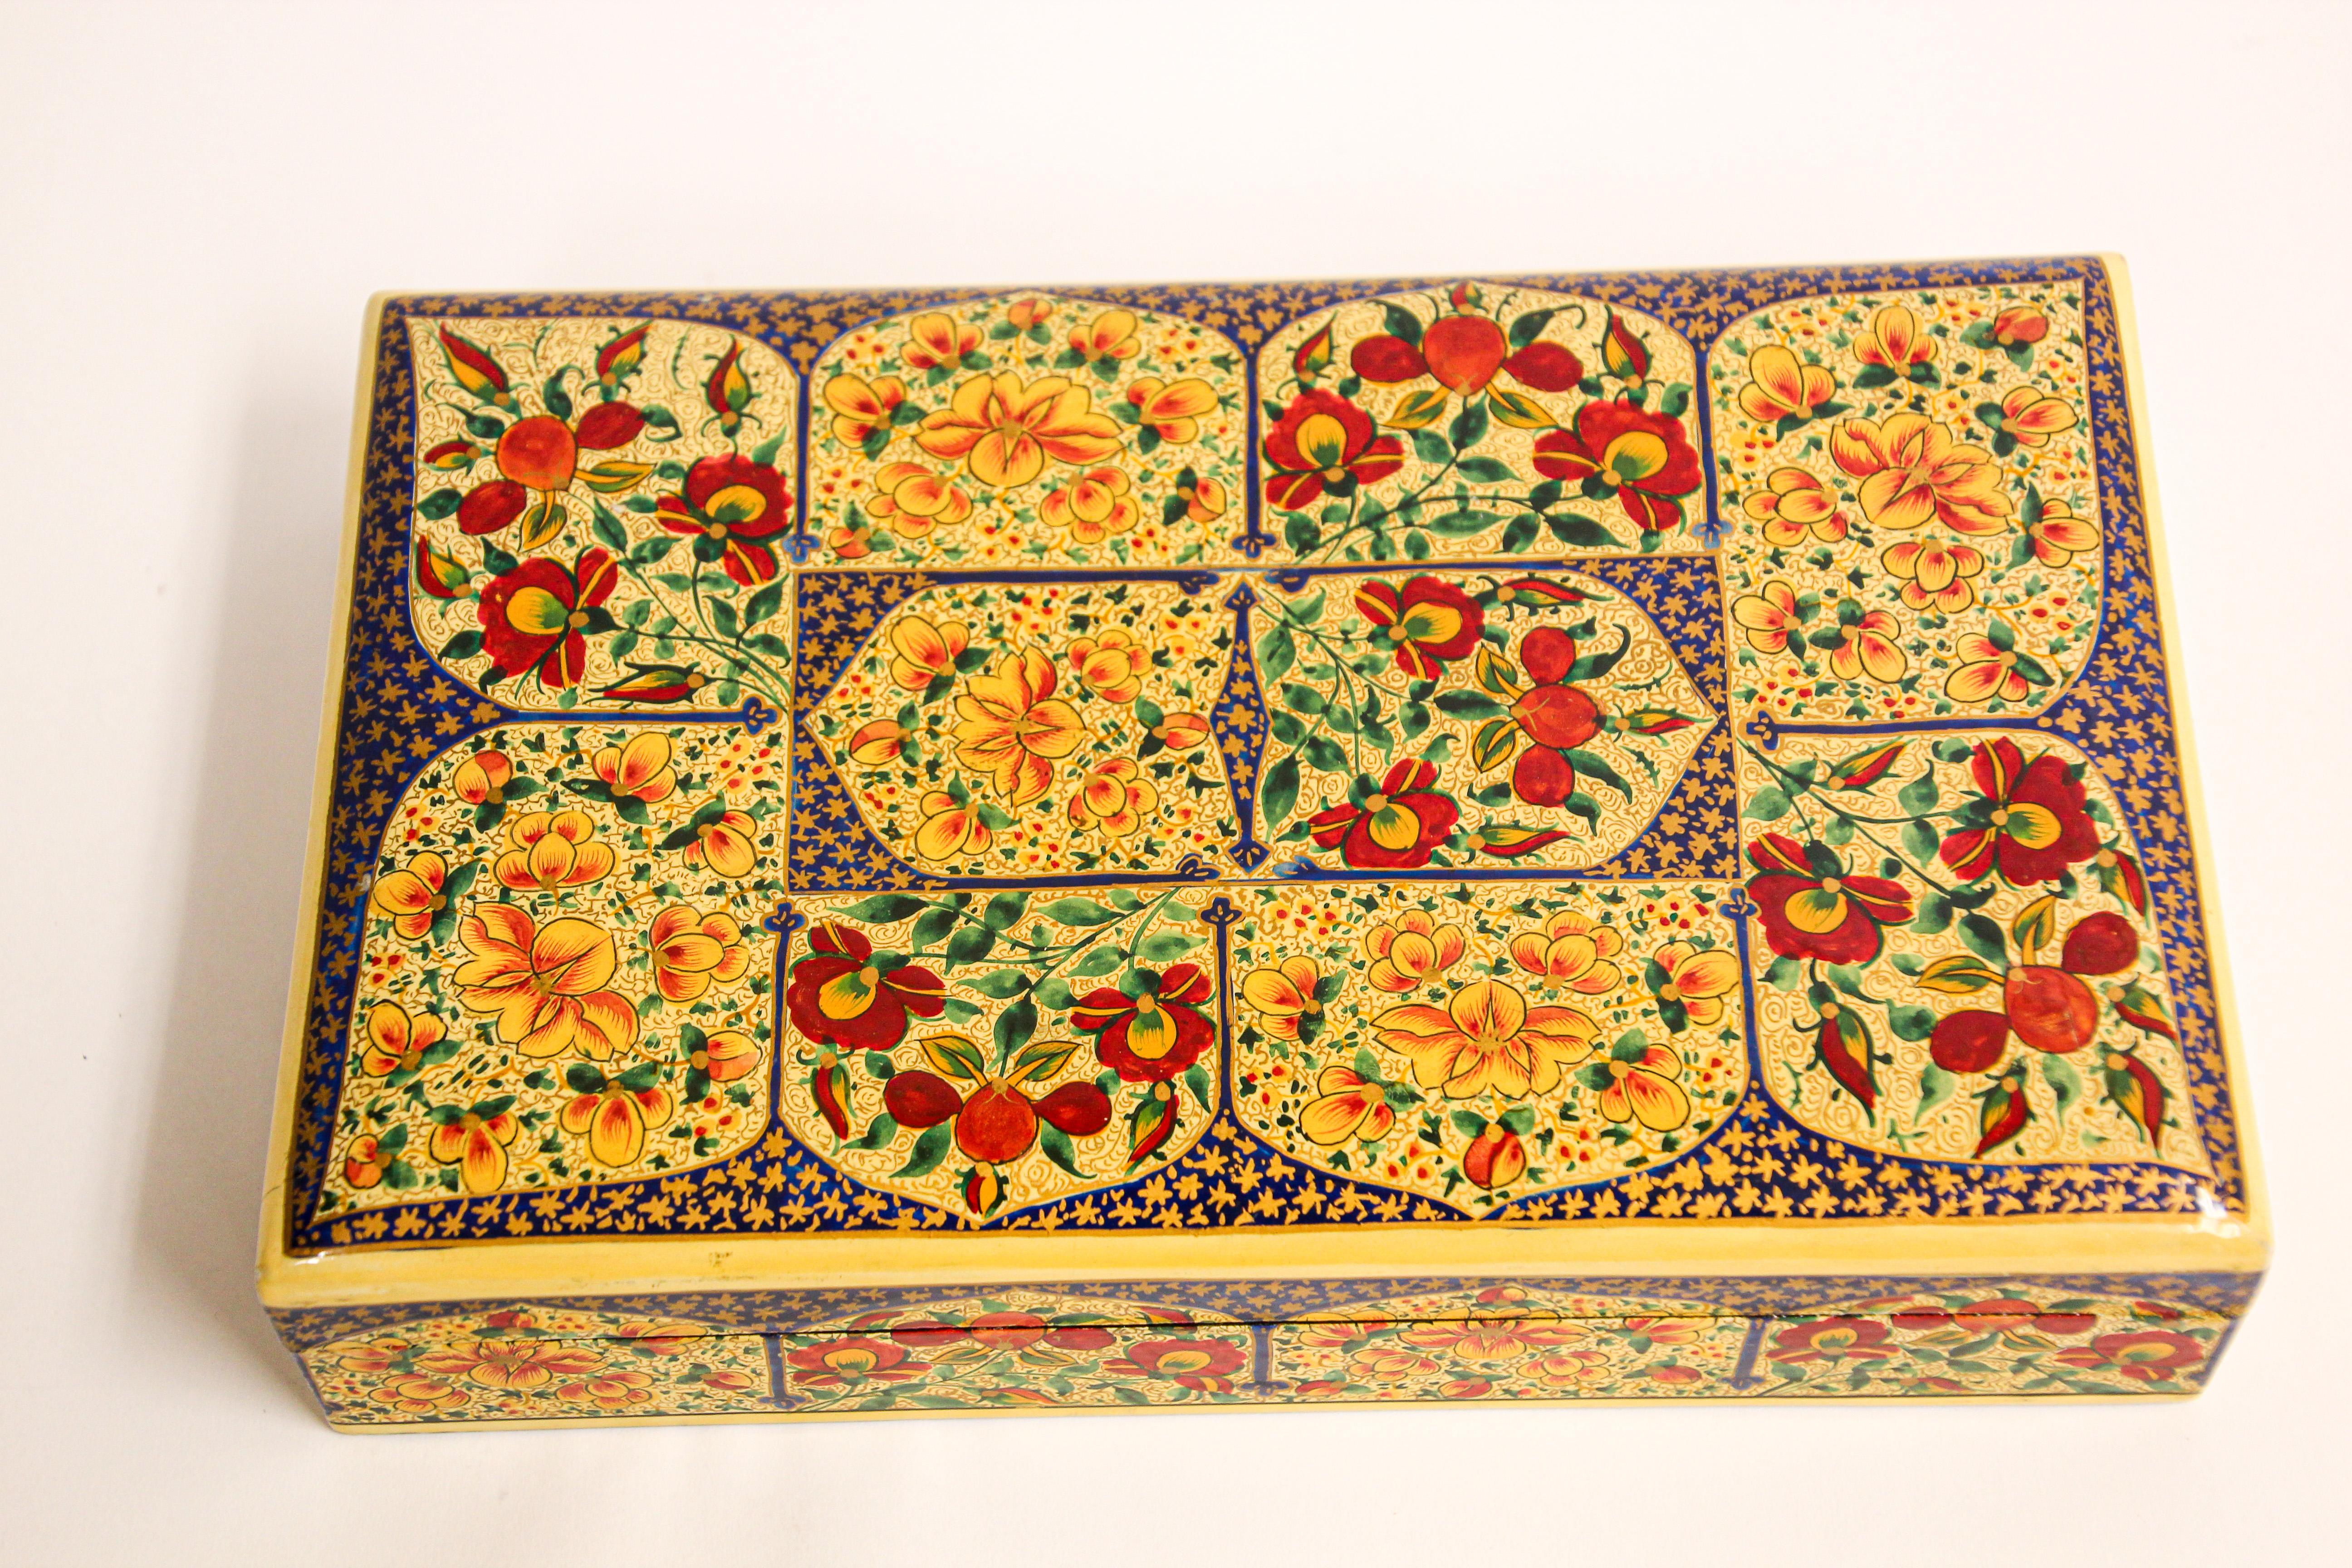 Hand painted Rajasthani lacquer box in rectangular shape with lid decorated with floral designs.
Great decorative box.
Size is 9